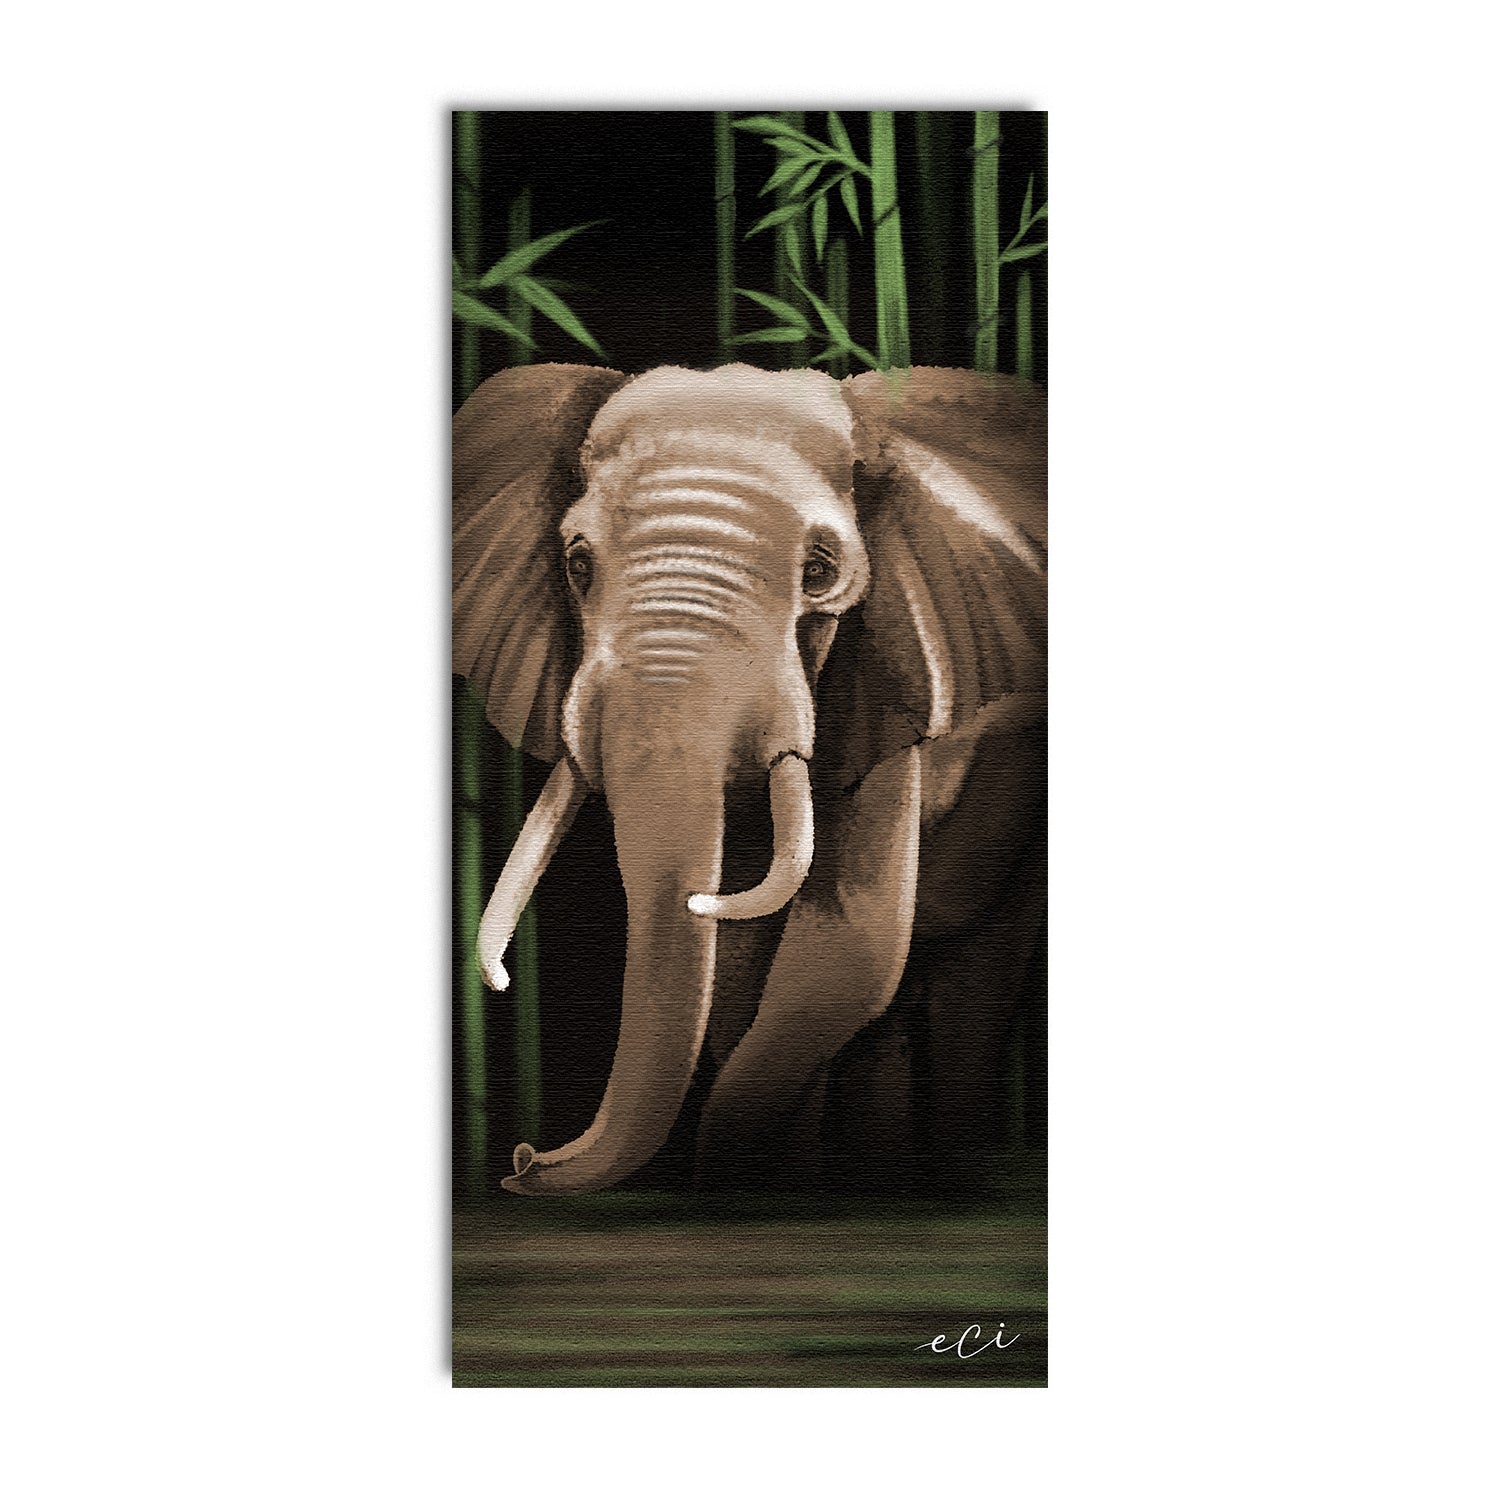 Elephant Walking In A Forest Canvas Painting Digital Printed Animal Wall Art